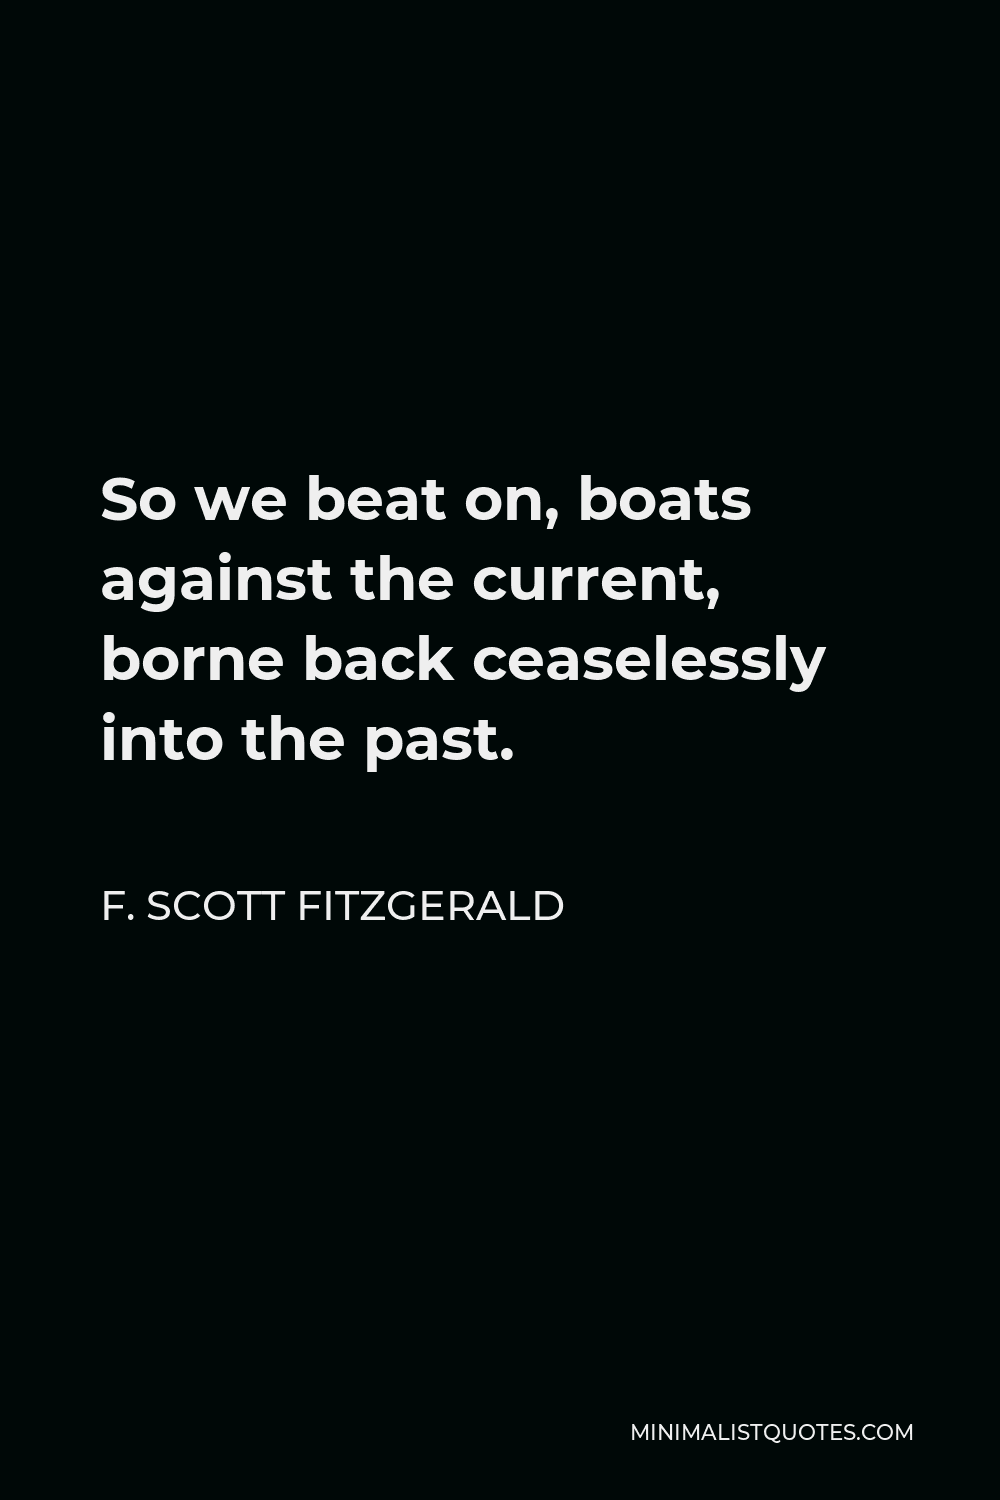 F. Scott Fitzgerald Quote: So We Beat On, Boats Against The Current, Borne Back Ceaselessly Into The Past.